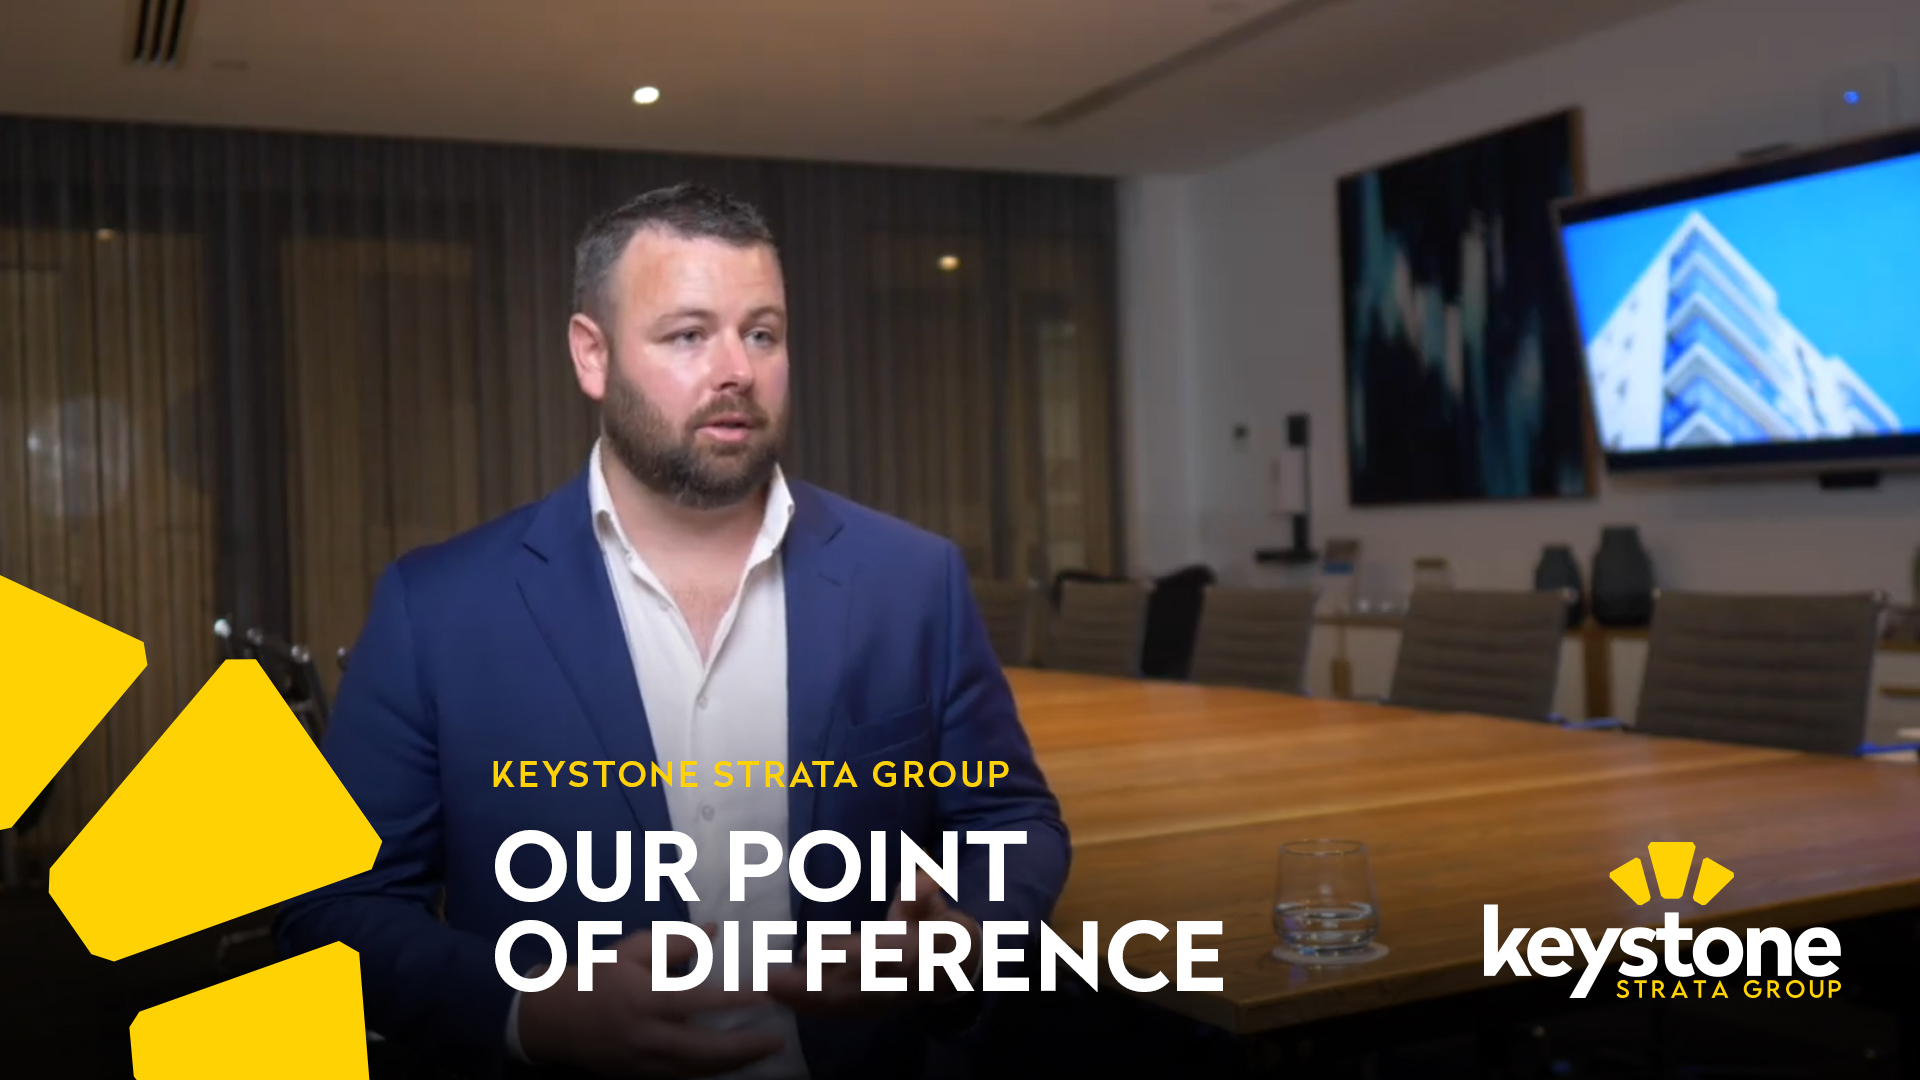 Keystone Strata Group Our Point of Difference